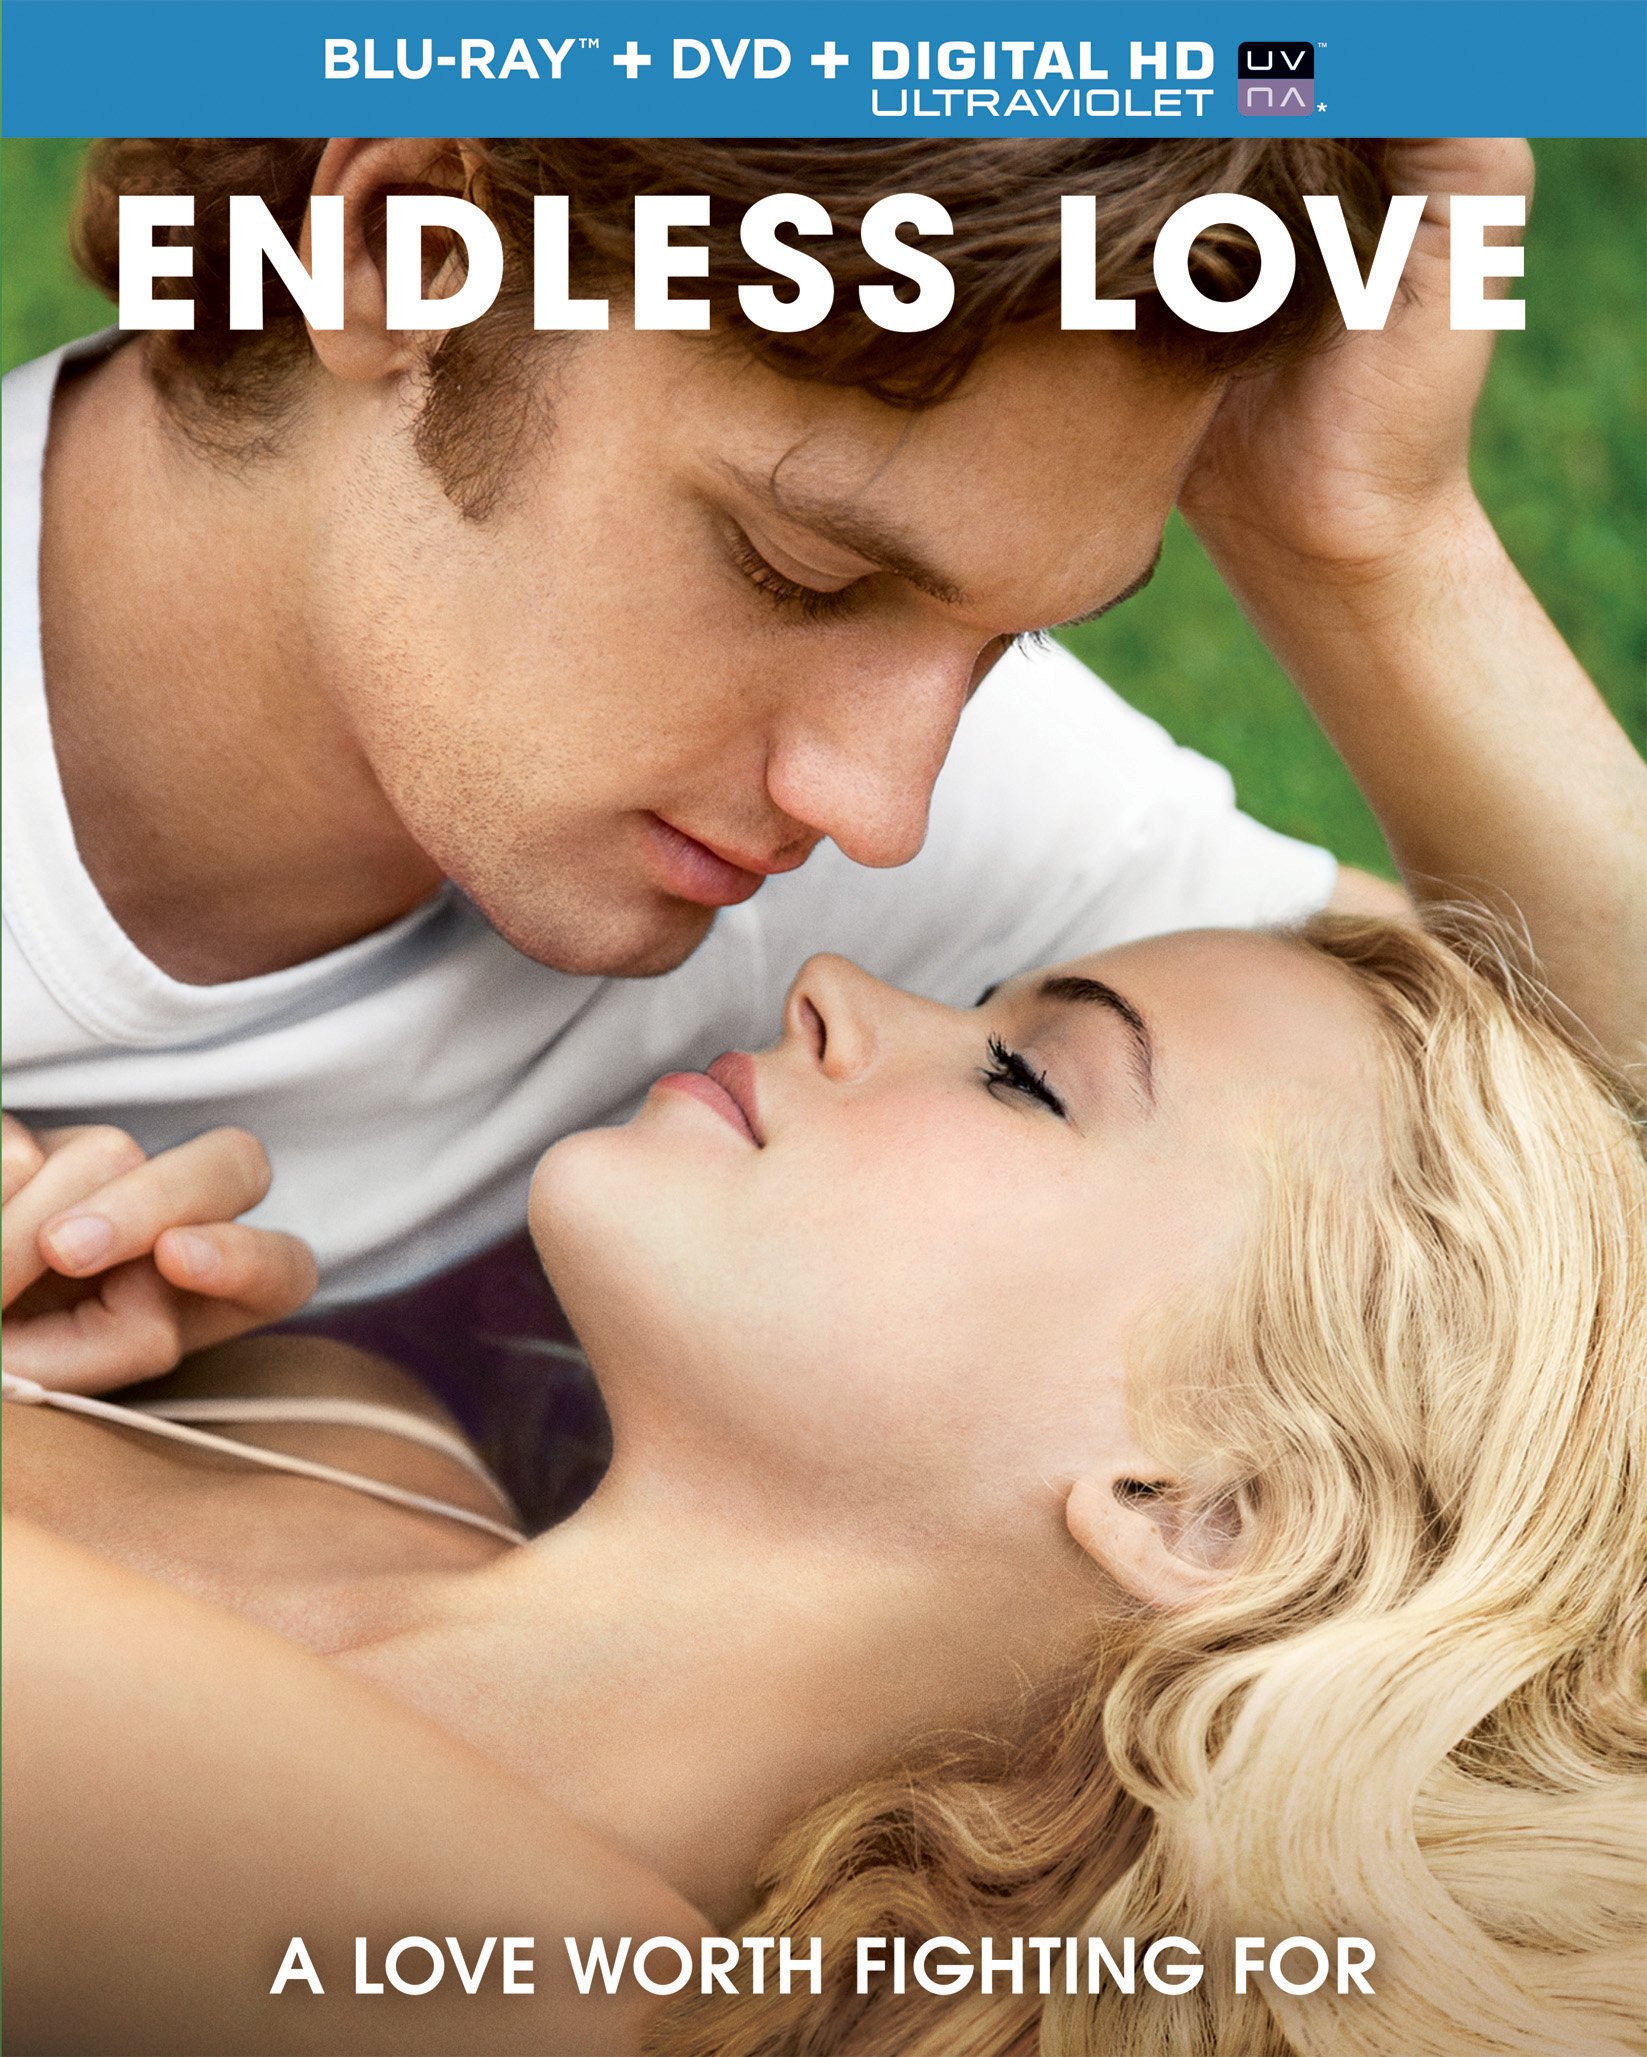 Endless Love Blu-ray Review